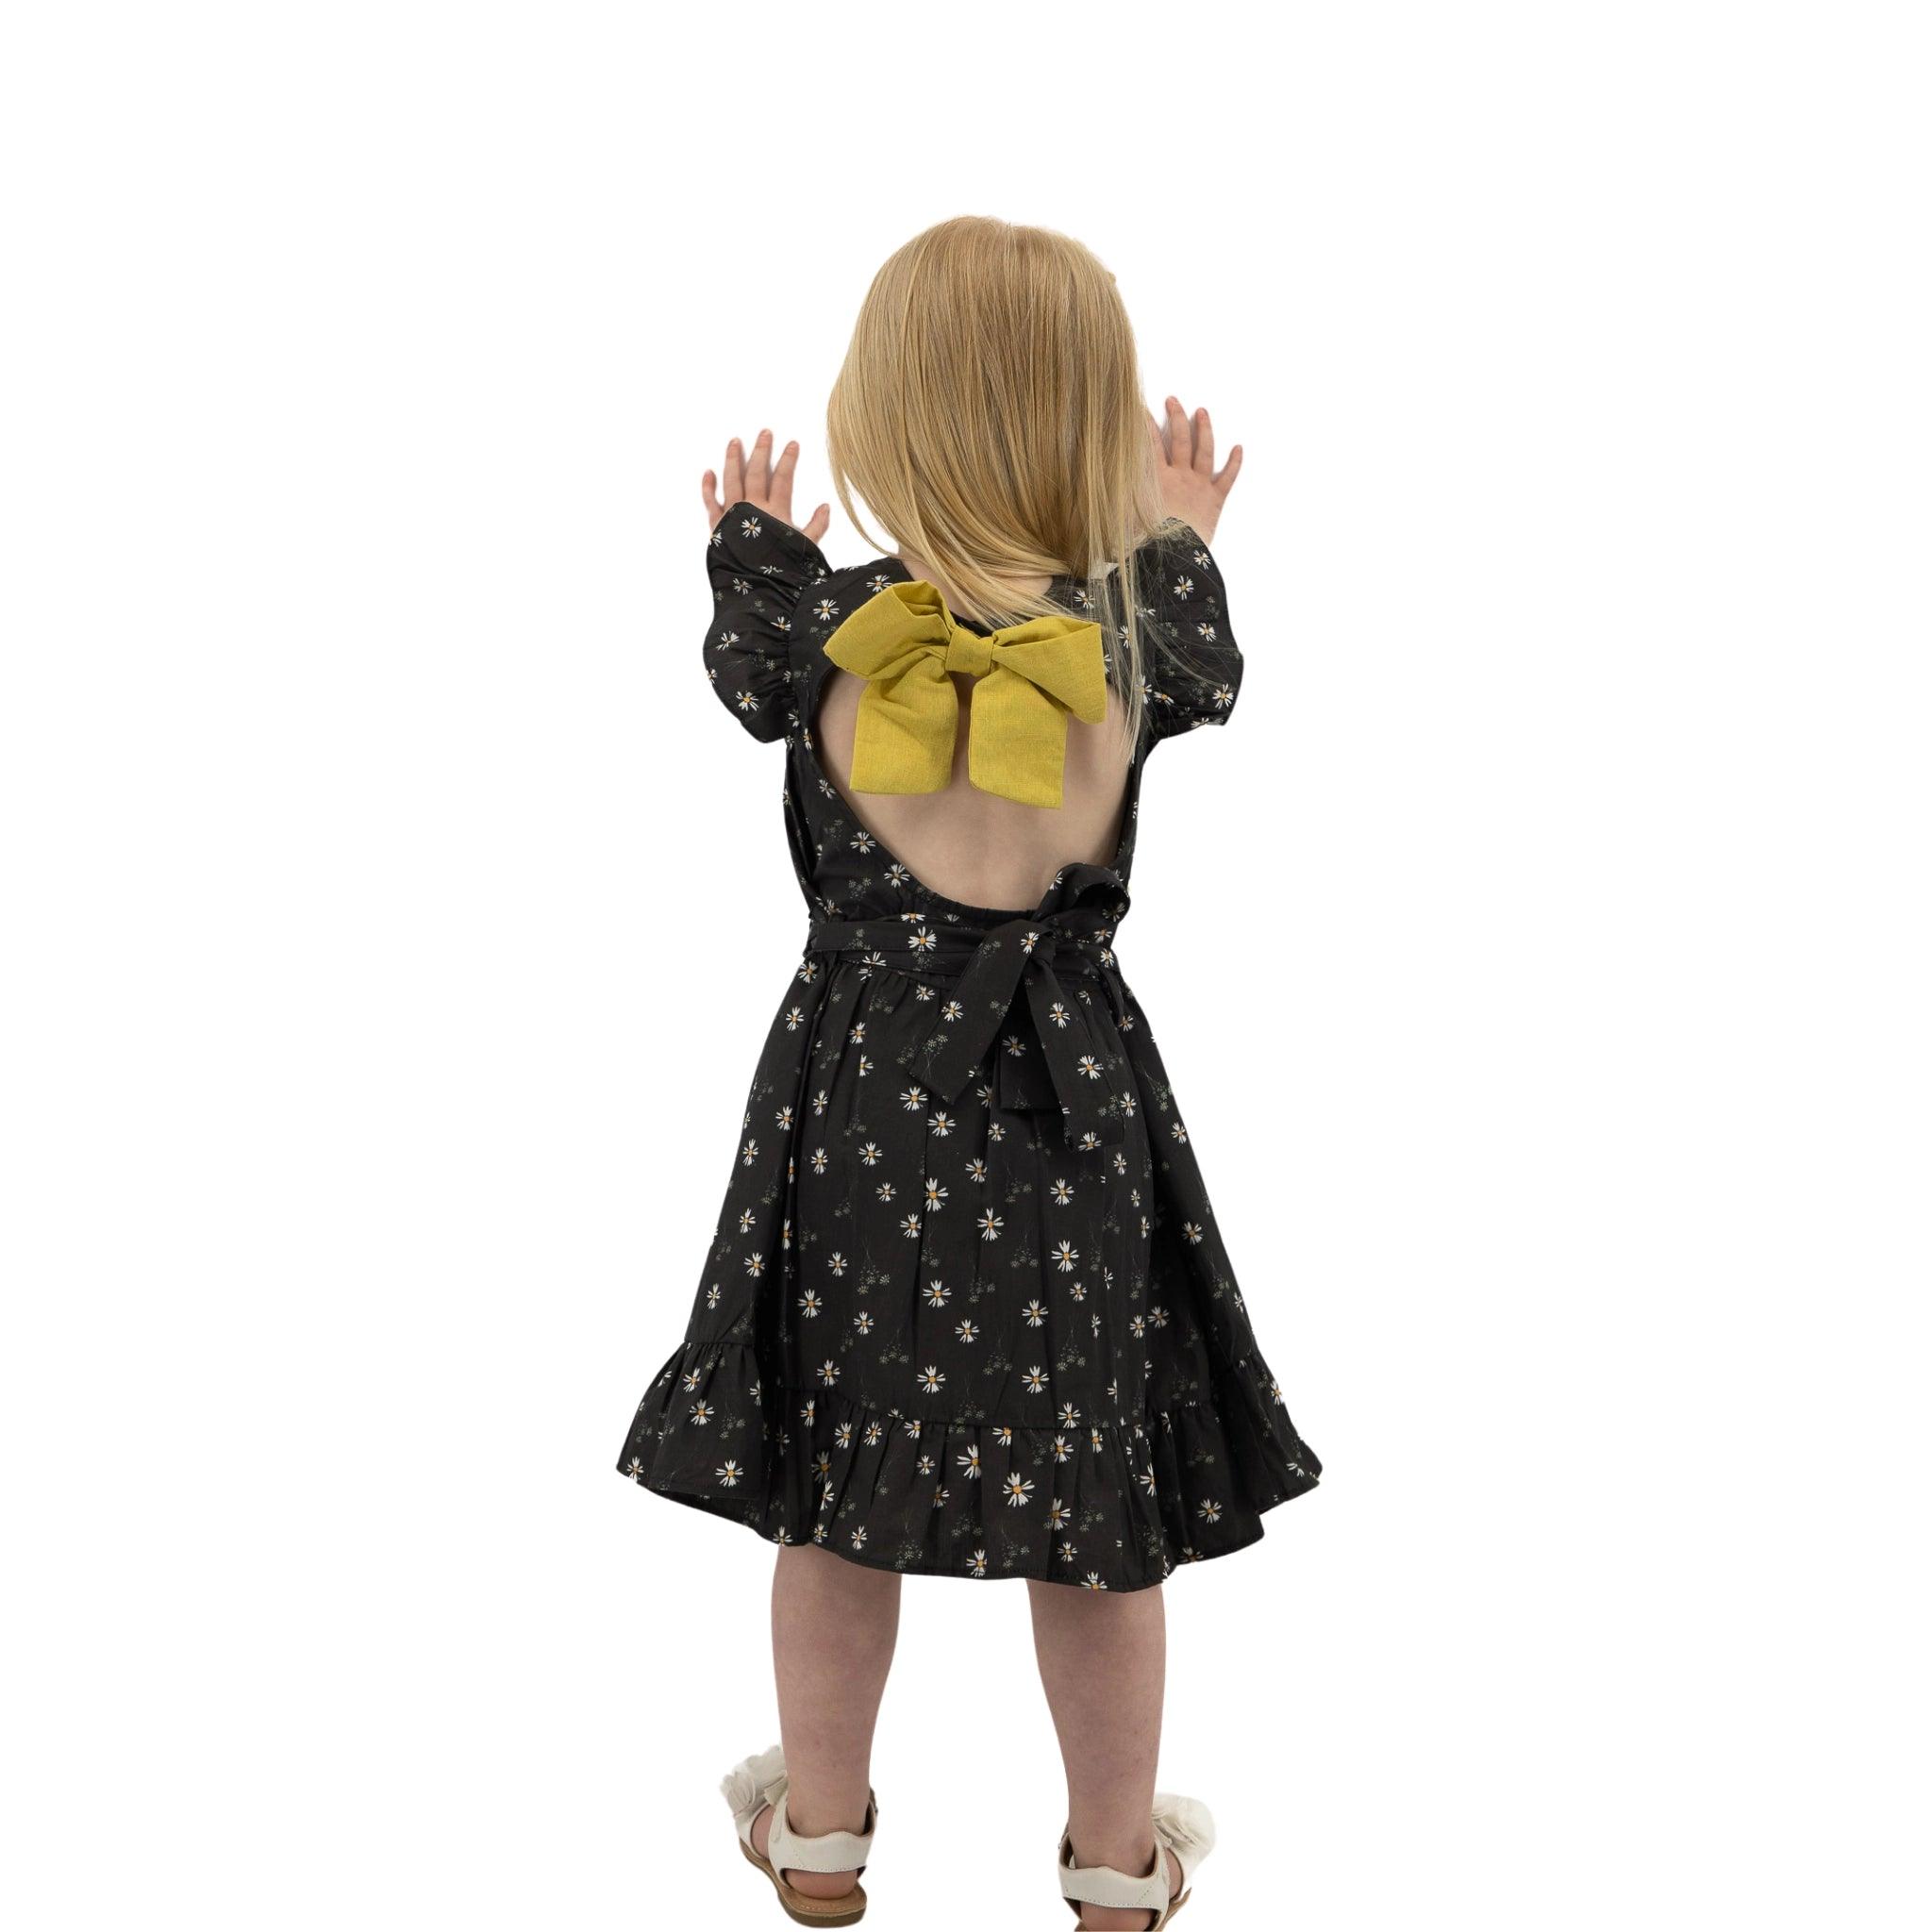 A young girl from behind, wearing a Karee Petite Blossom Black Cotton Dress with a large yellow bow, pressing her hands against an invisible surface.